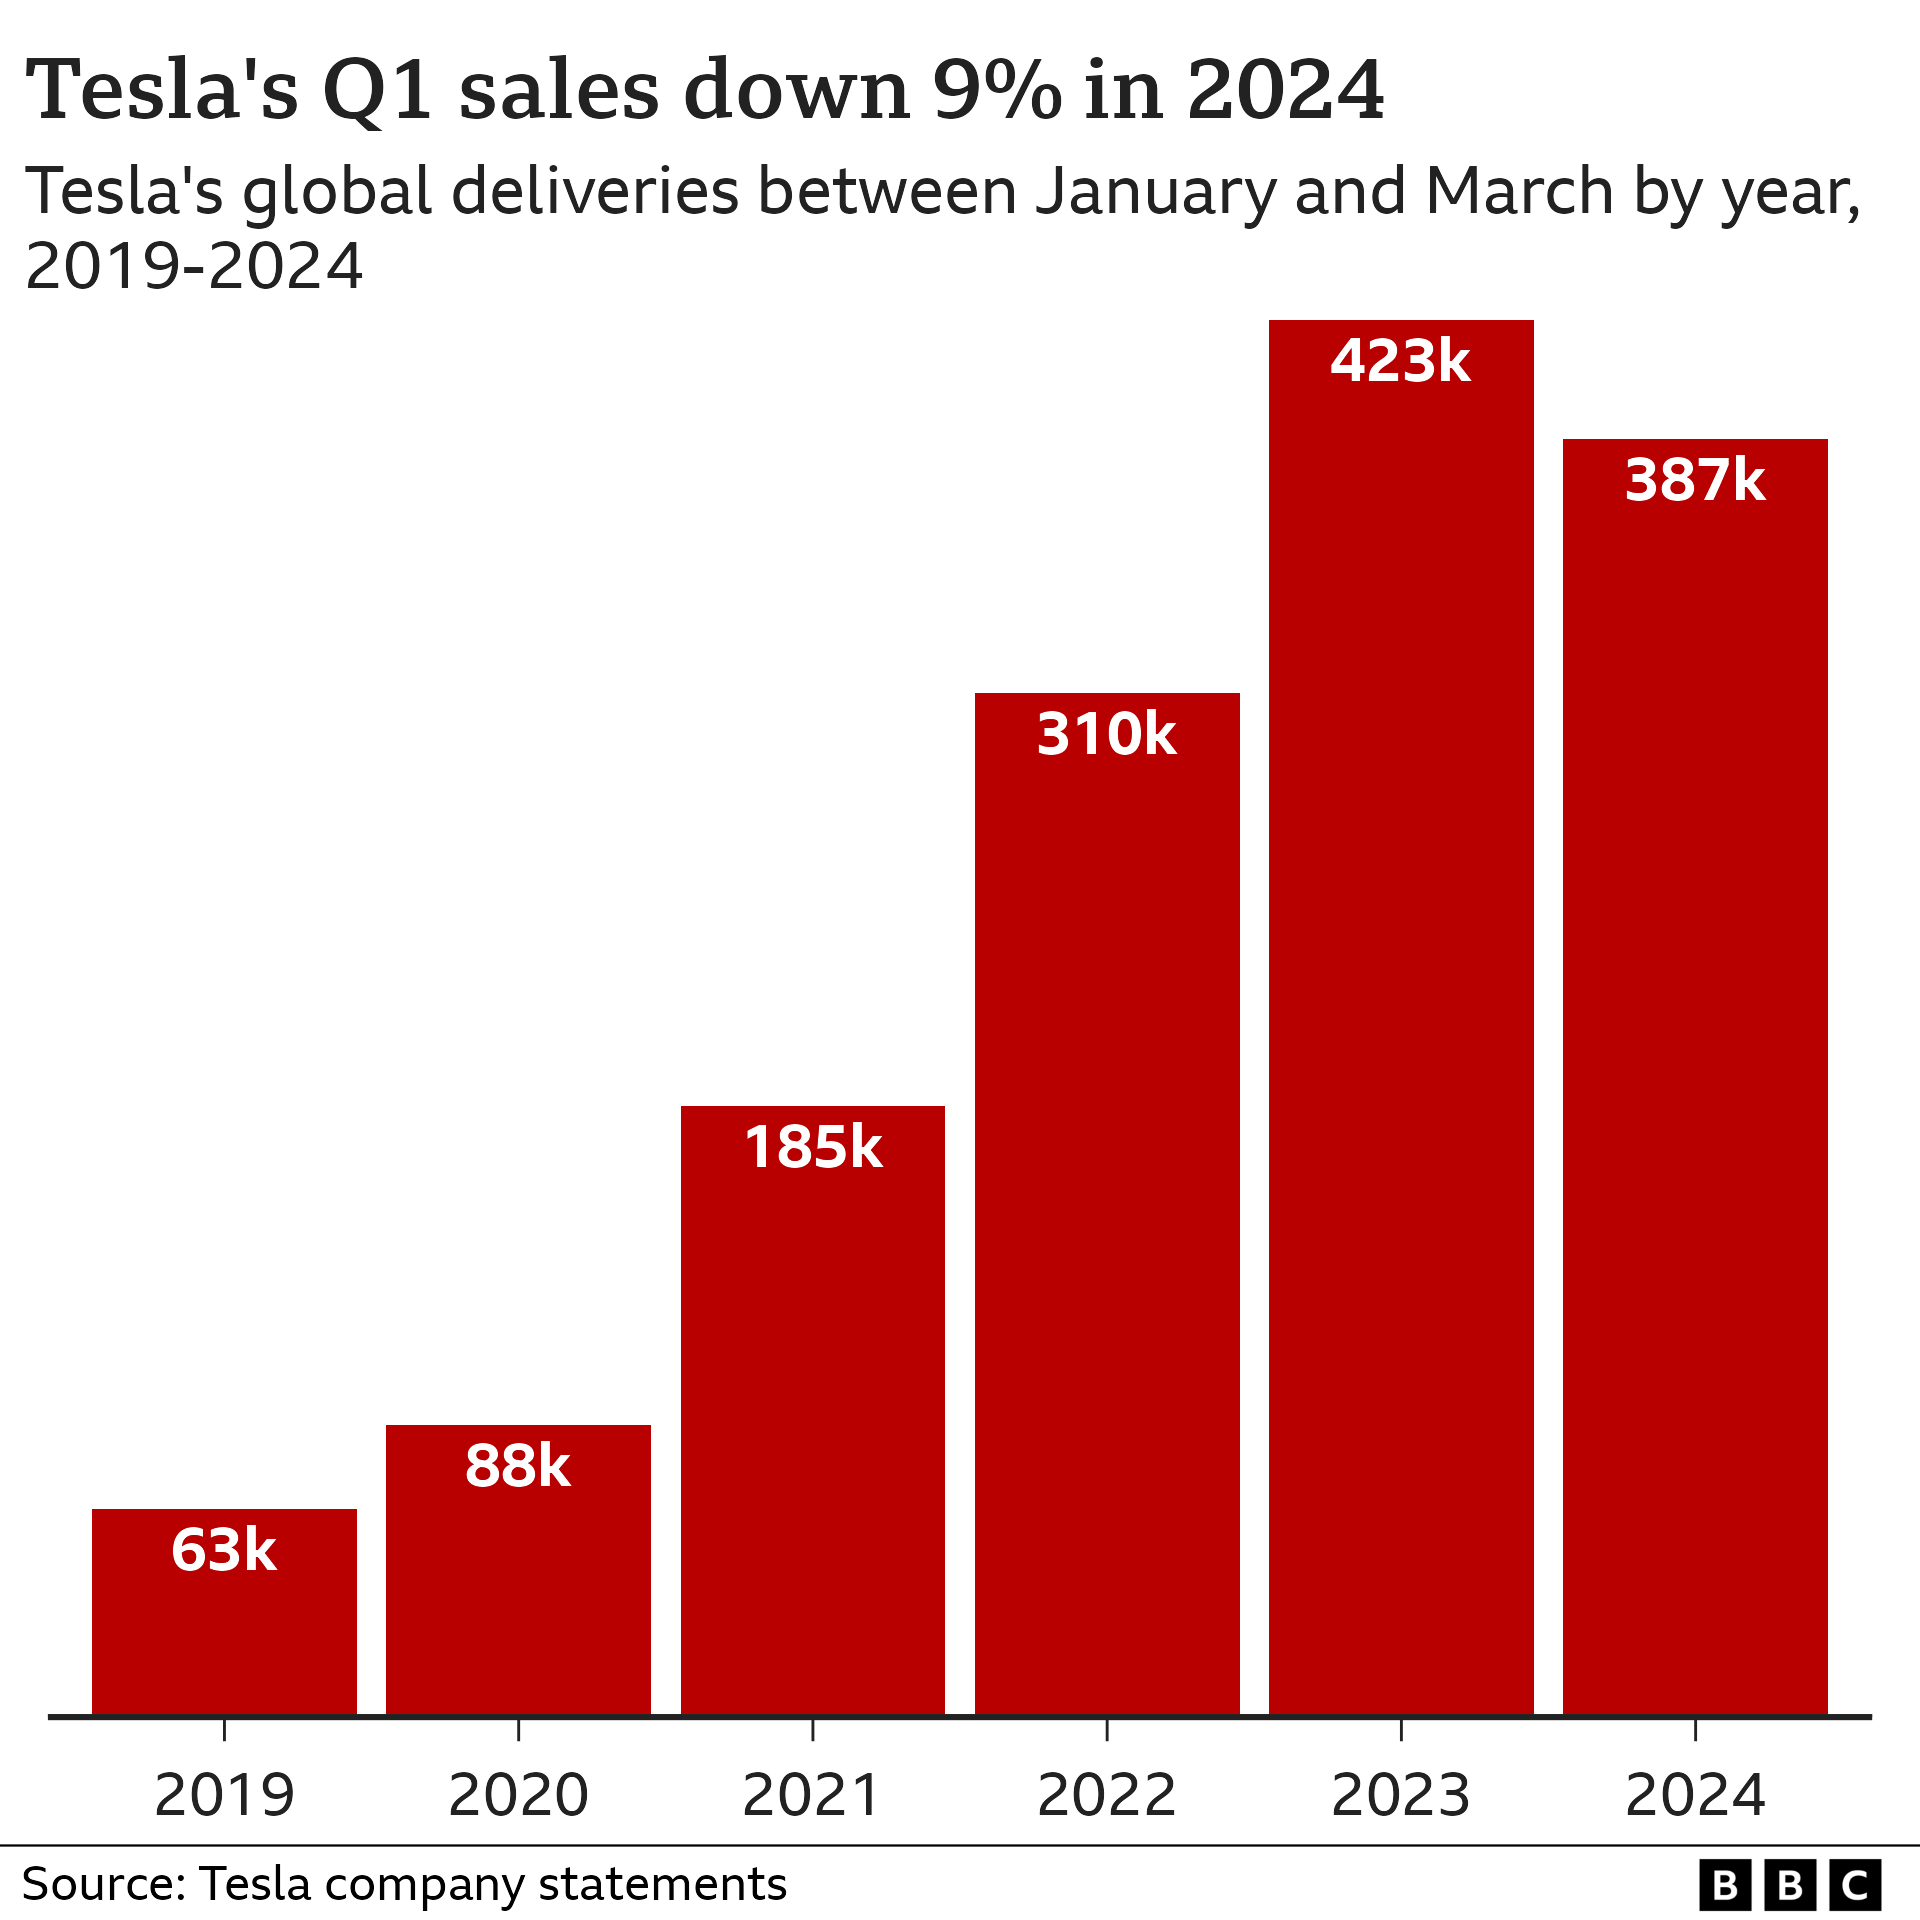 Graphic showing Tesla's Q1 sales down 9% in 2024